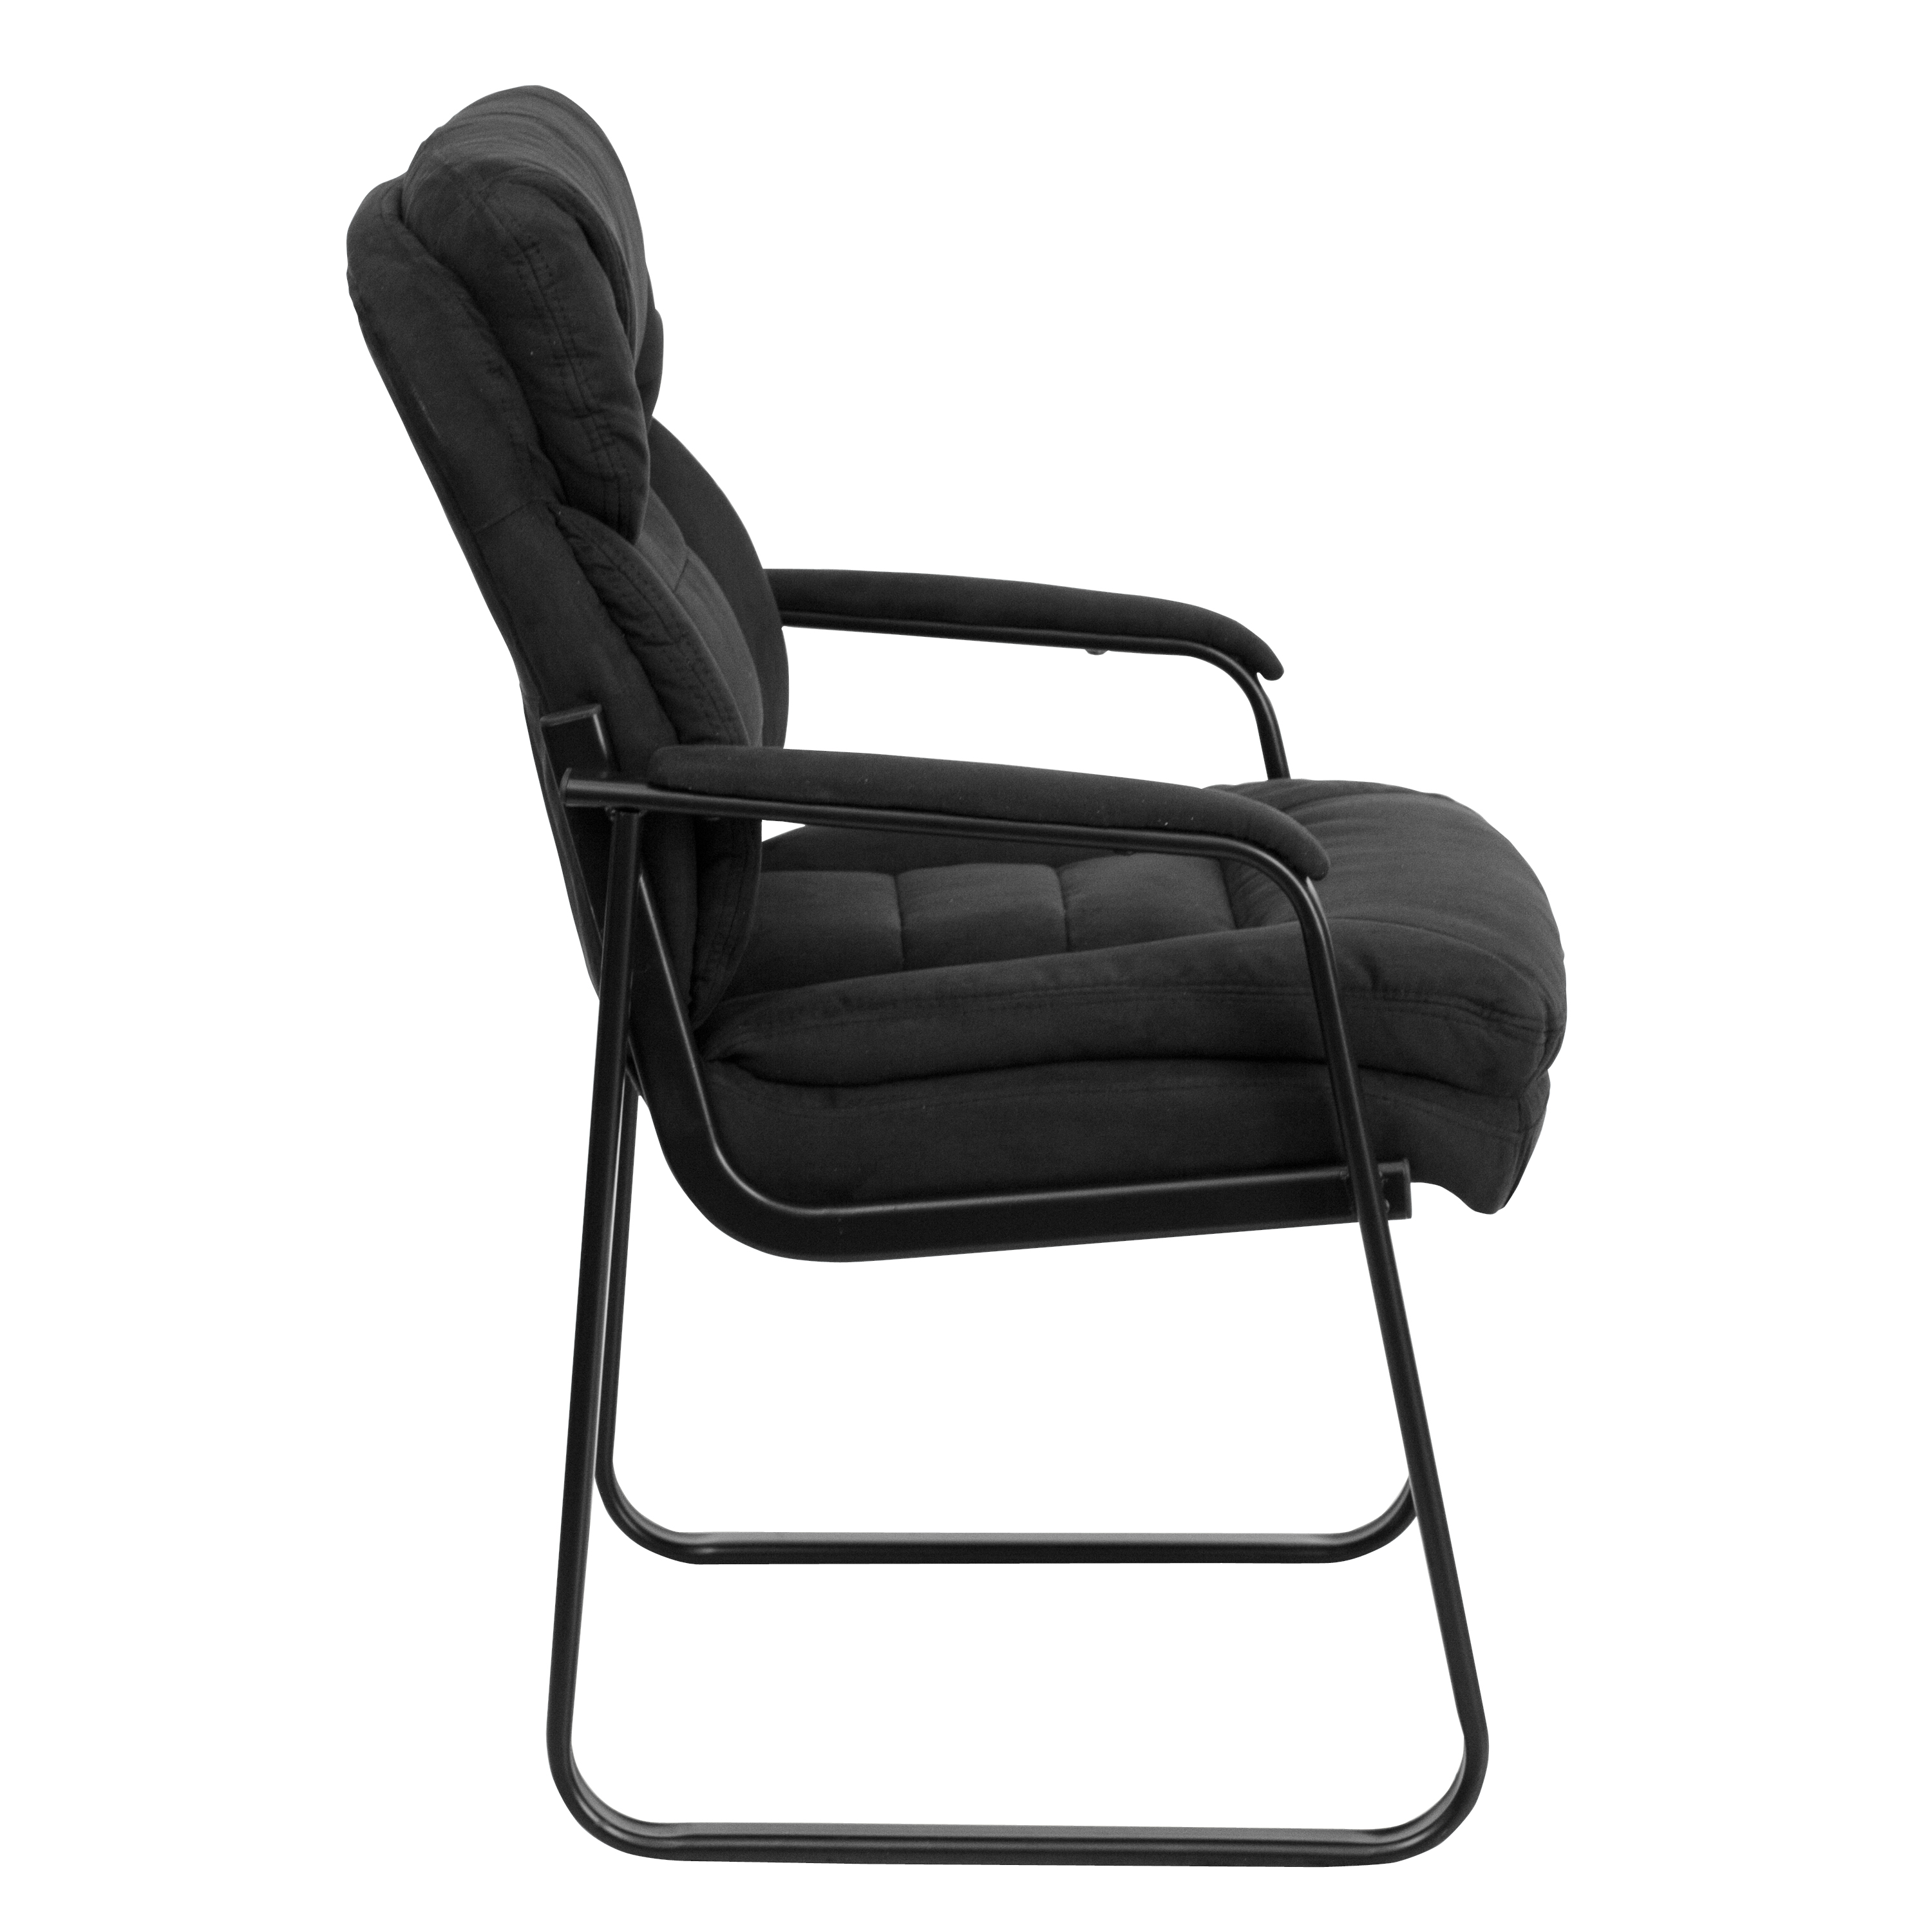 Flash Furniture Isla Black Microfiber Executive Side Reception Chair with Lumbar Support and Sled Base - image 5 of 6